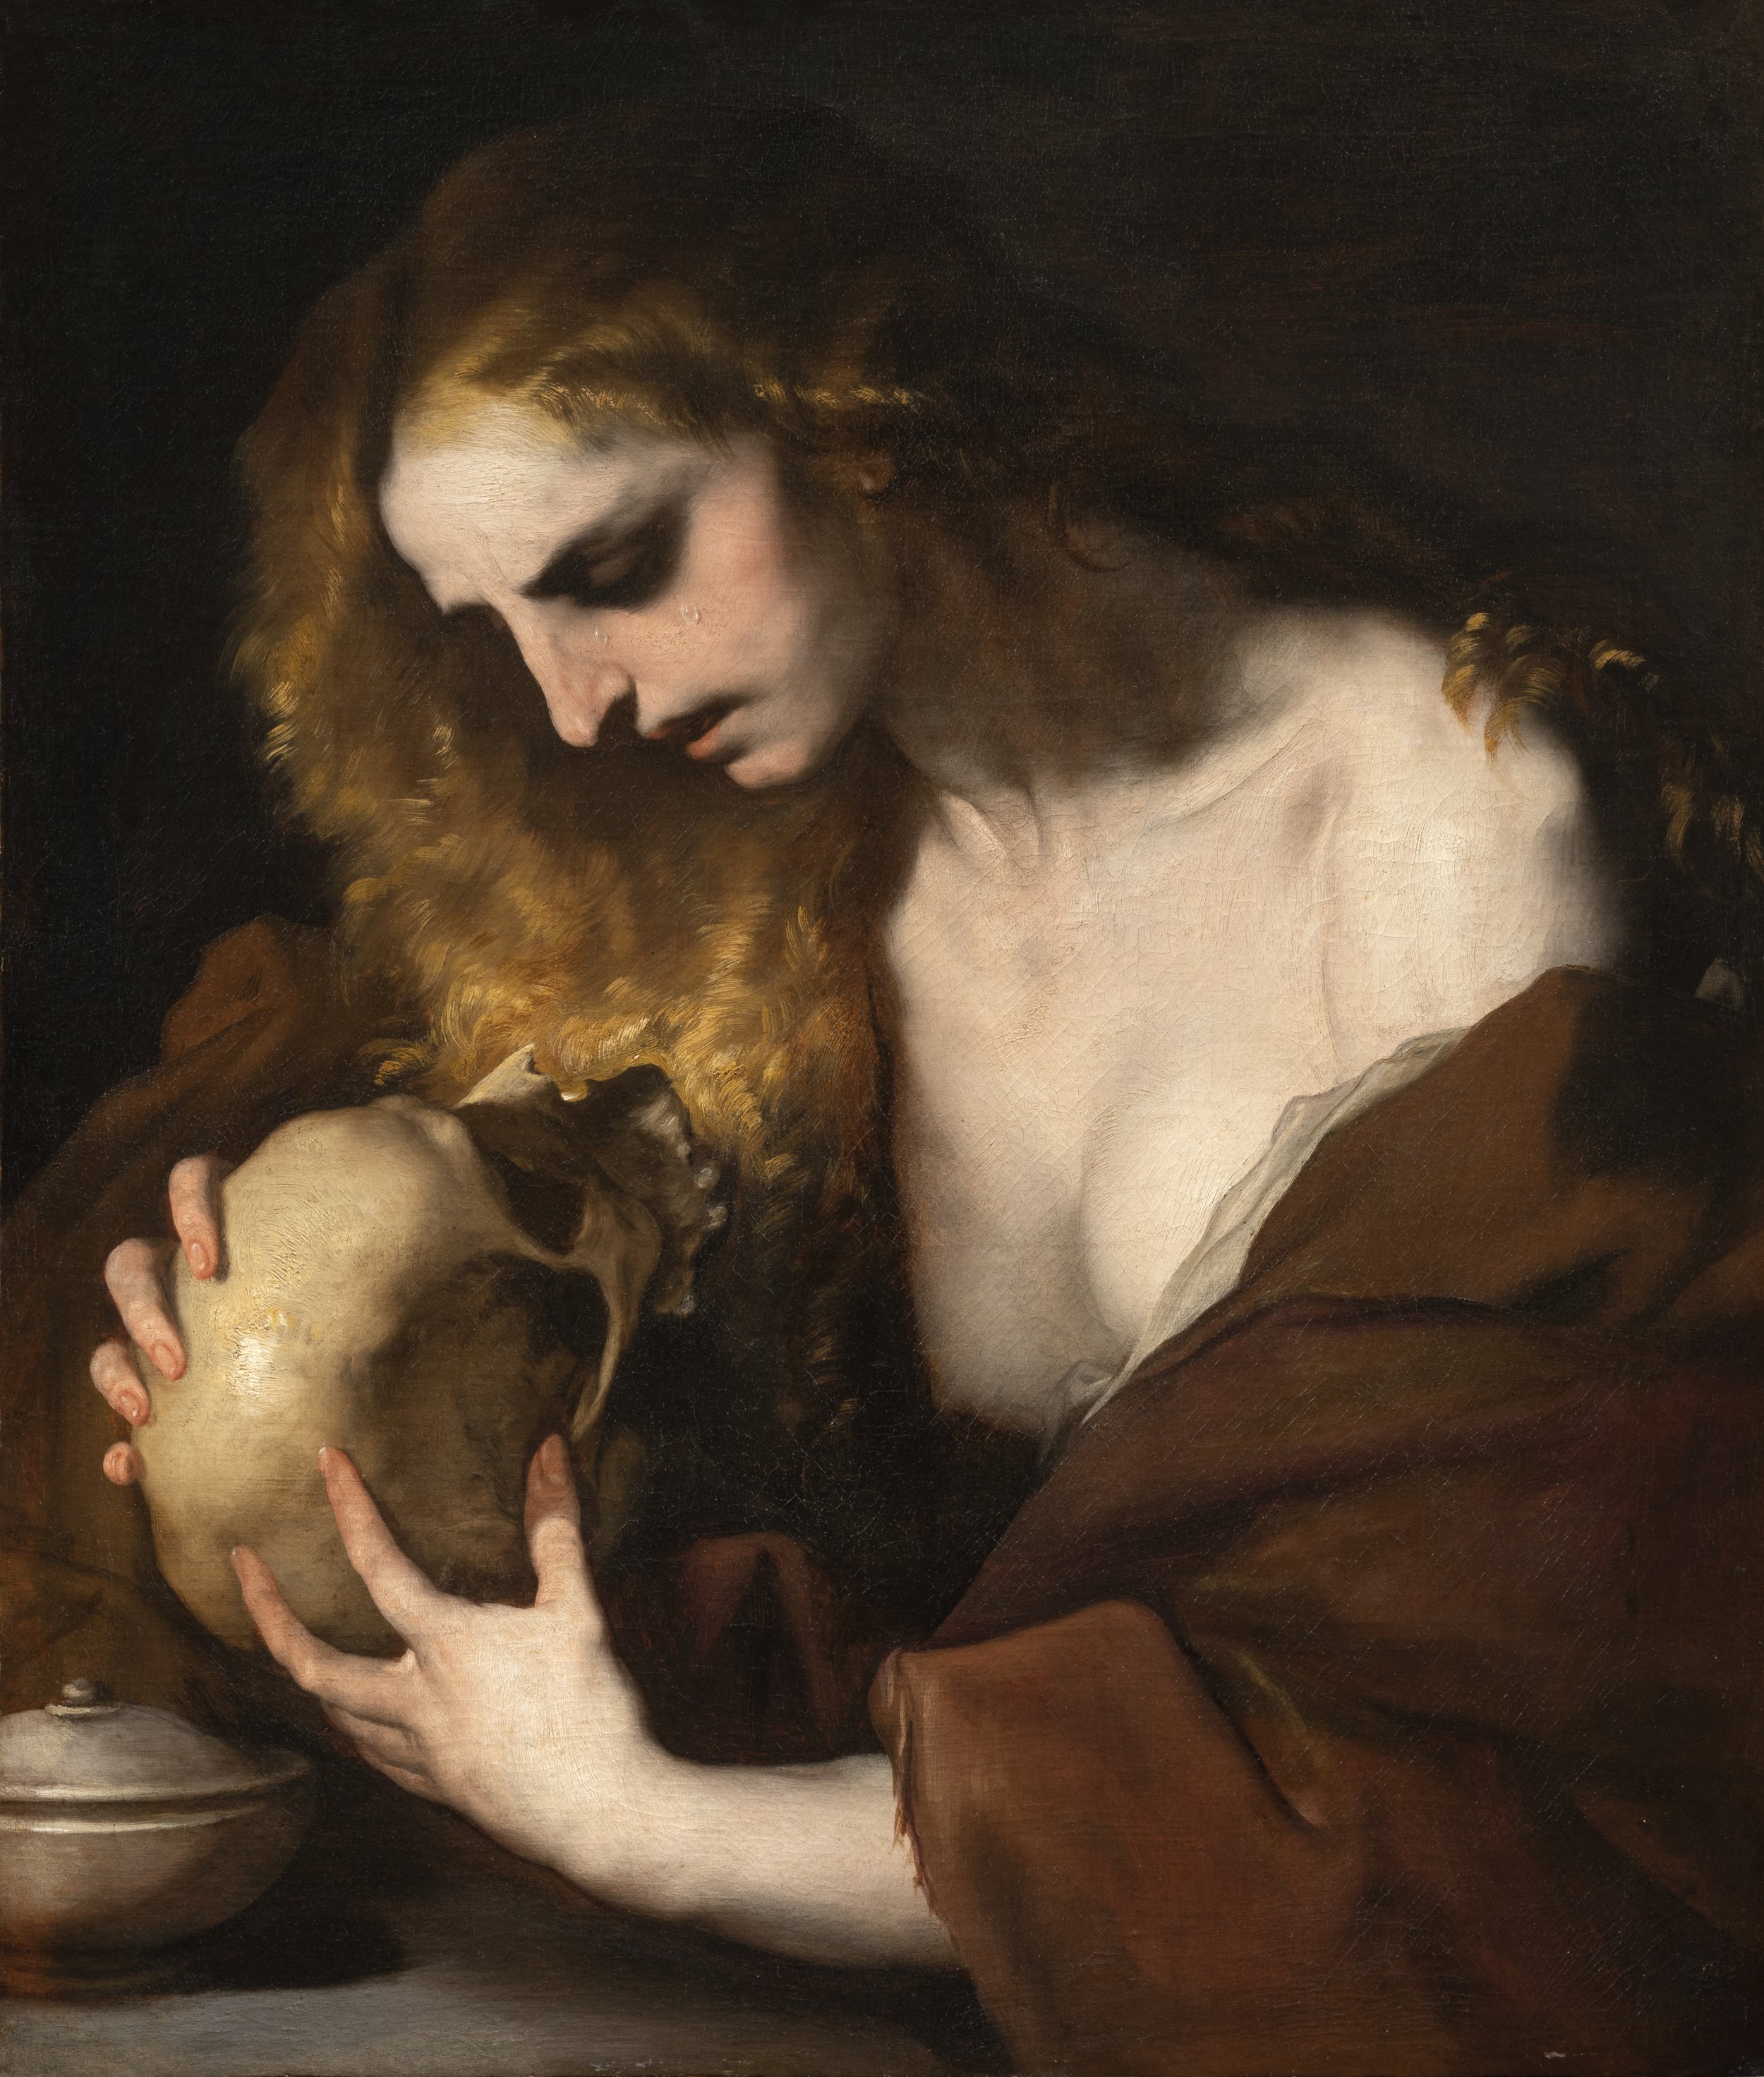  LUCA GIORDANO 1634 - 1705     Penitent Magdalene   c. 1660 - 1665    Oil on canvas 76 x 63.5 cm    Provenance:  Wunderkammer S.A., Lugano; from whom acquired by the present owner in 2000    Sold to the Fine Art Museum of San Francisco, Legion of Hon